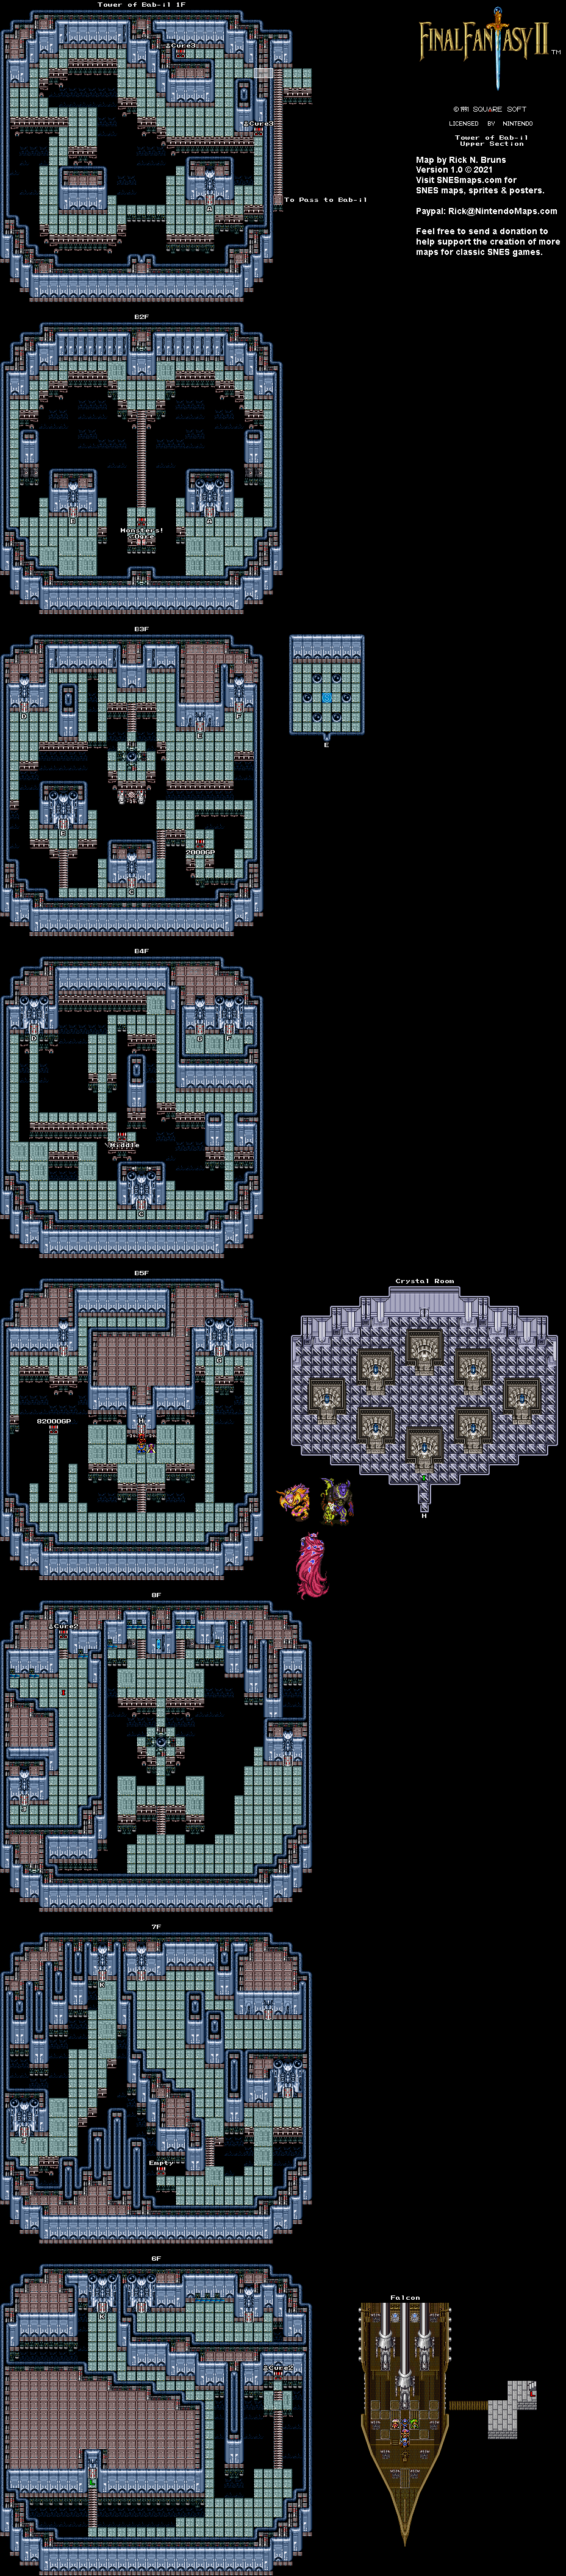 Final Fantasy II 2 (IV 4) - Tower of Bab-il Upper Section Super Nintendo SNES Map